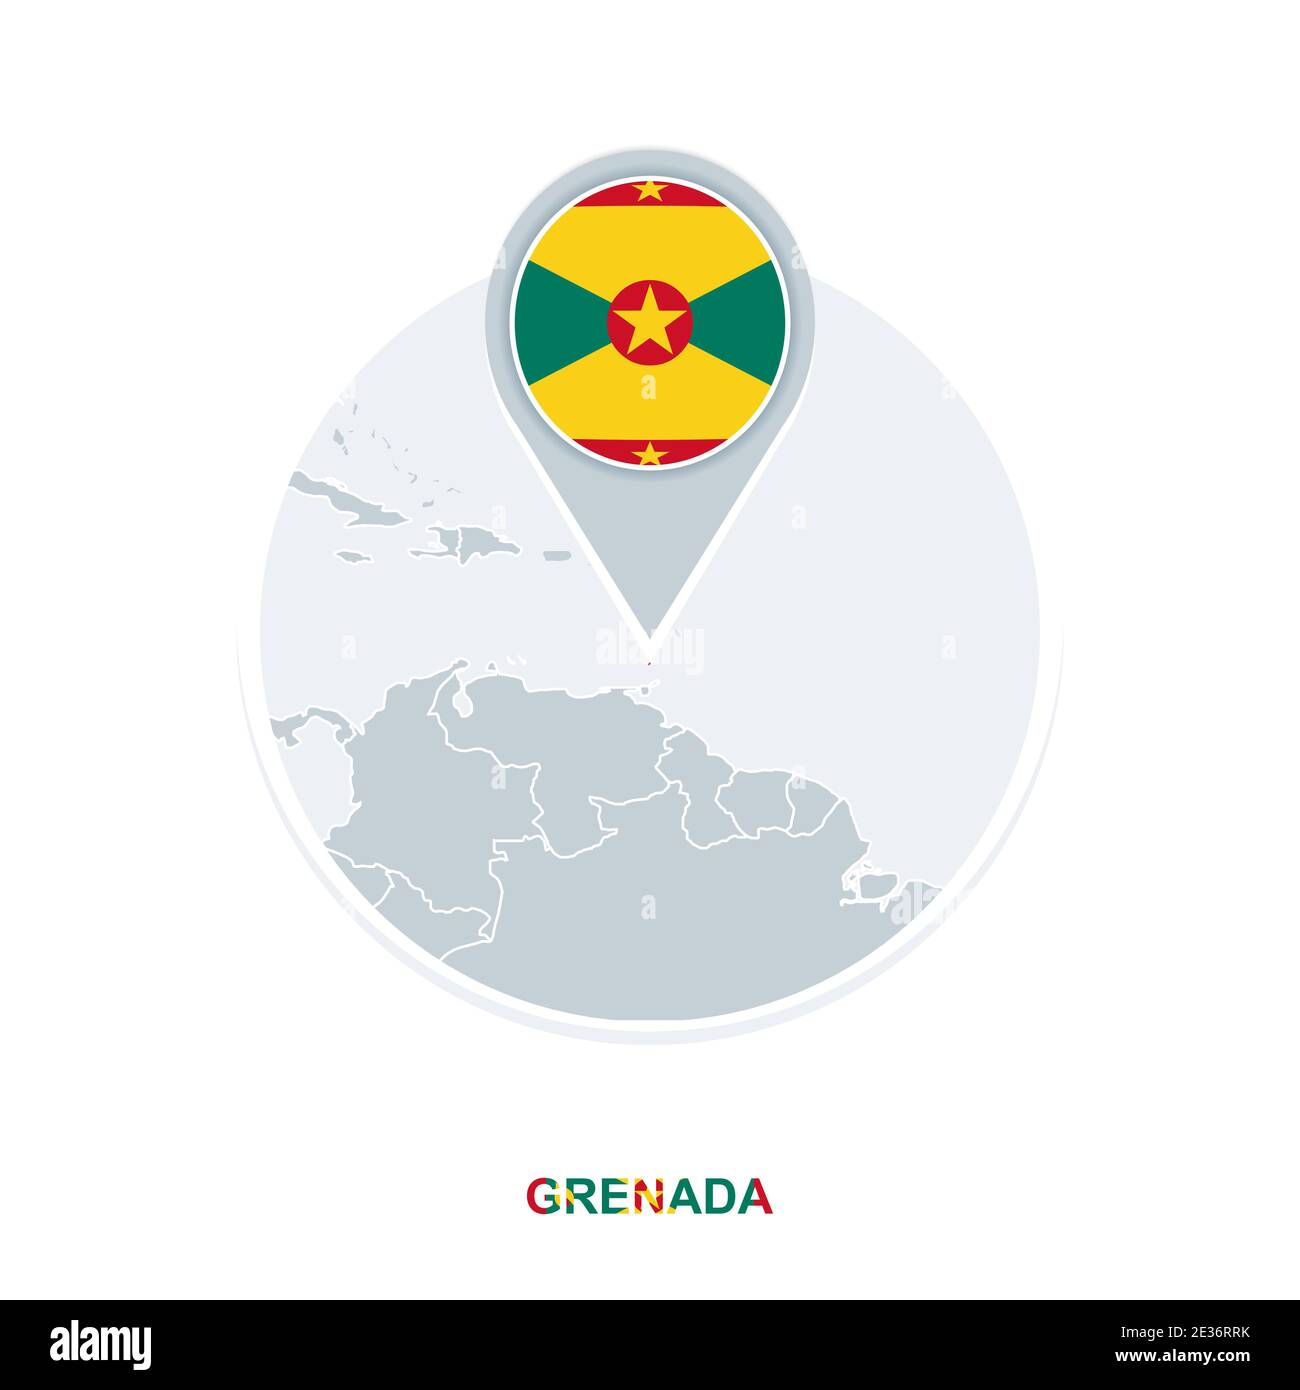 Grenada map and flag, vector map icon with highlighted Grenada Stock Vector